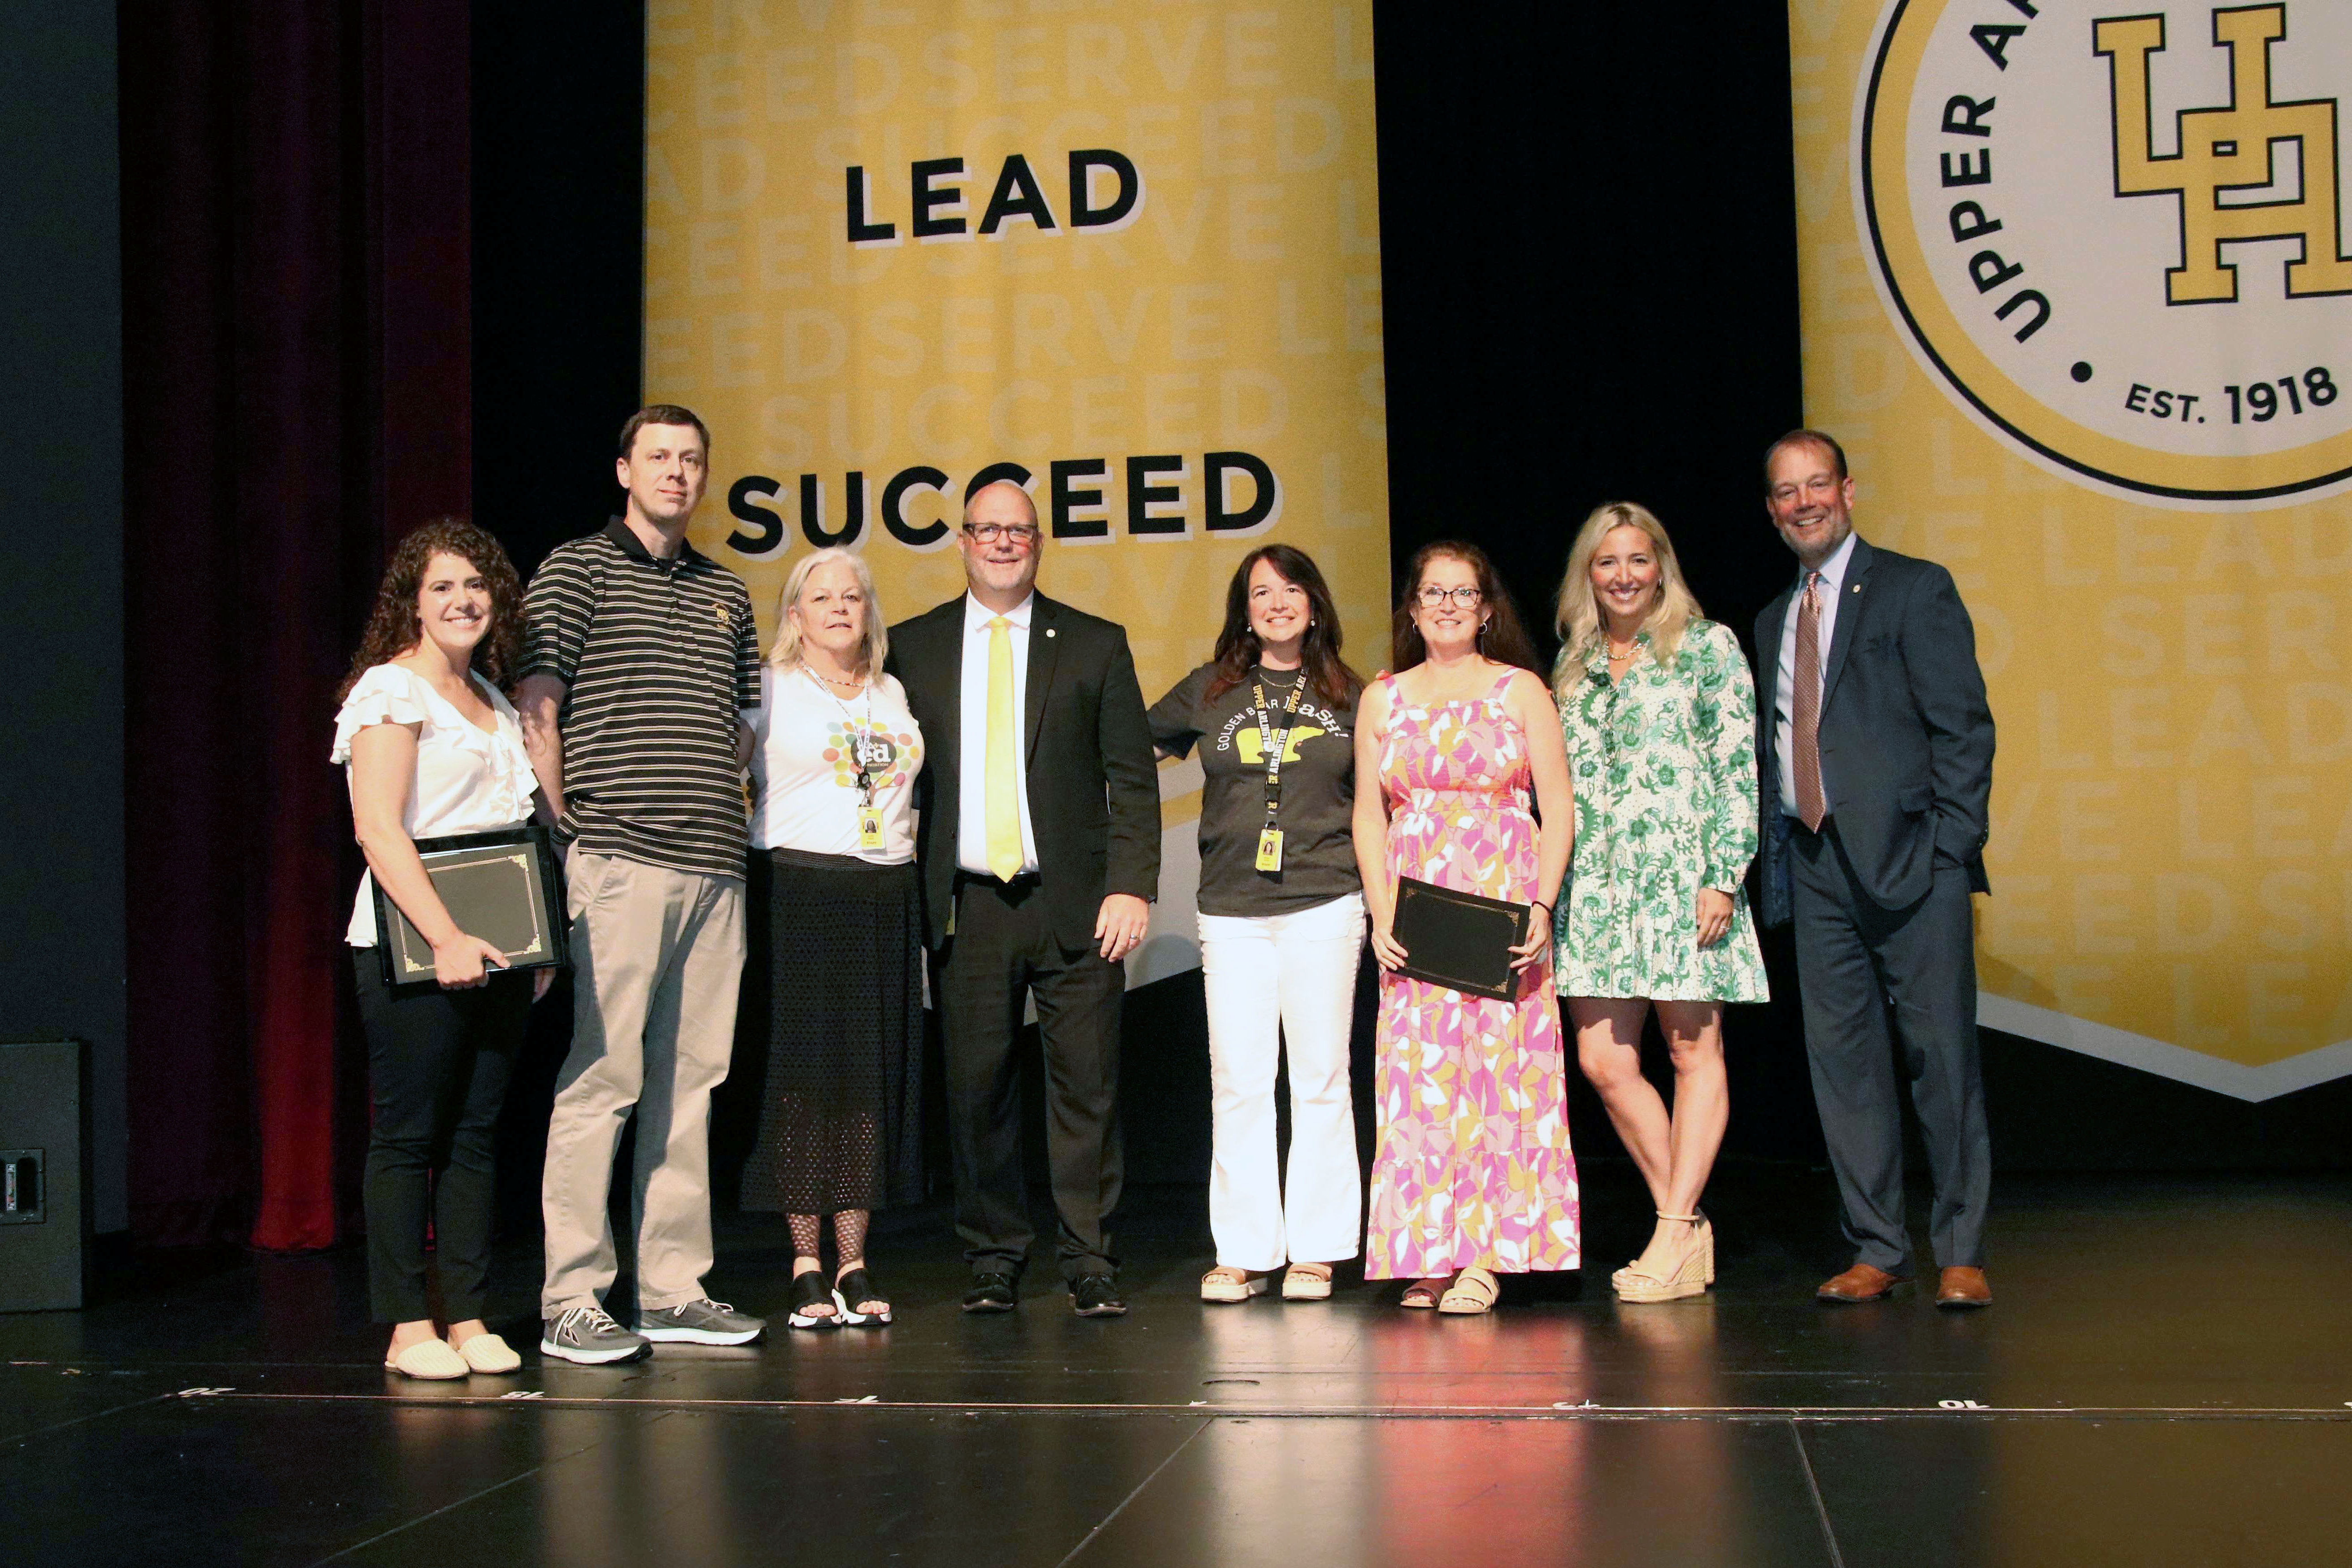 The three recipients of the Joanie Dugger Educator of the Year Awards posing for a photo with administrators and representatives from the Upper Arlington Education Foundation